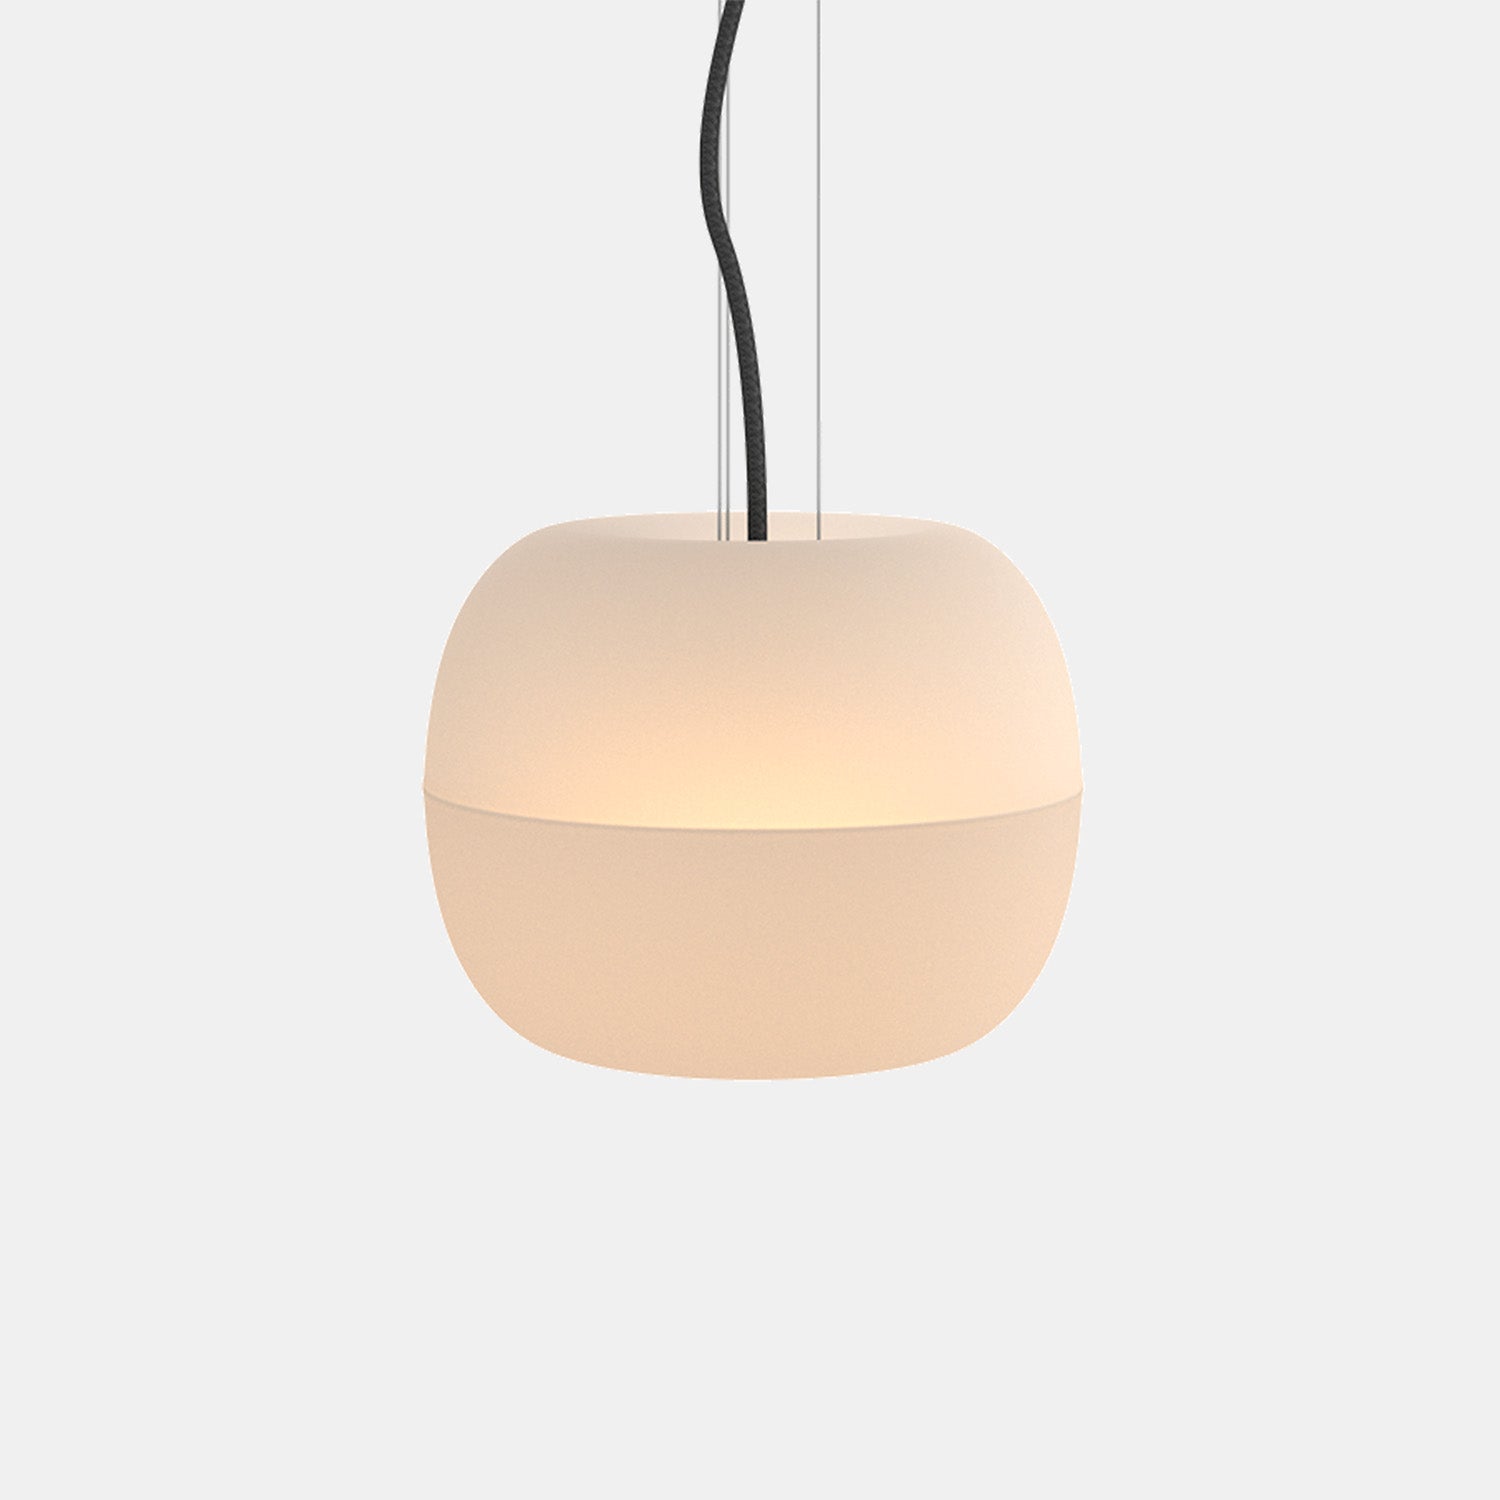 MALUS - Blown glass pendant light, cocooning and elegant